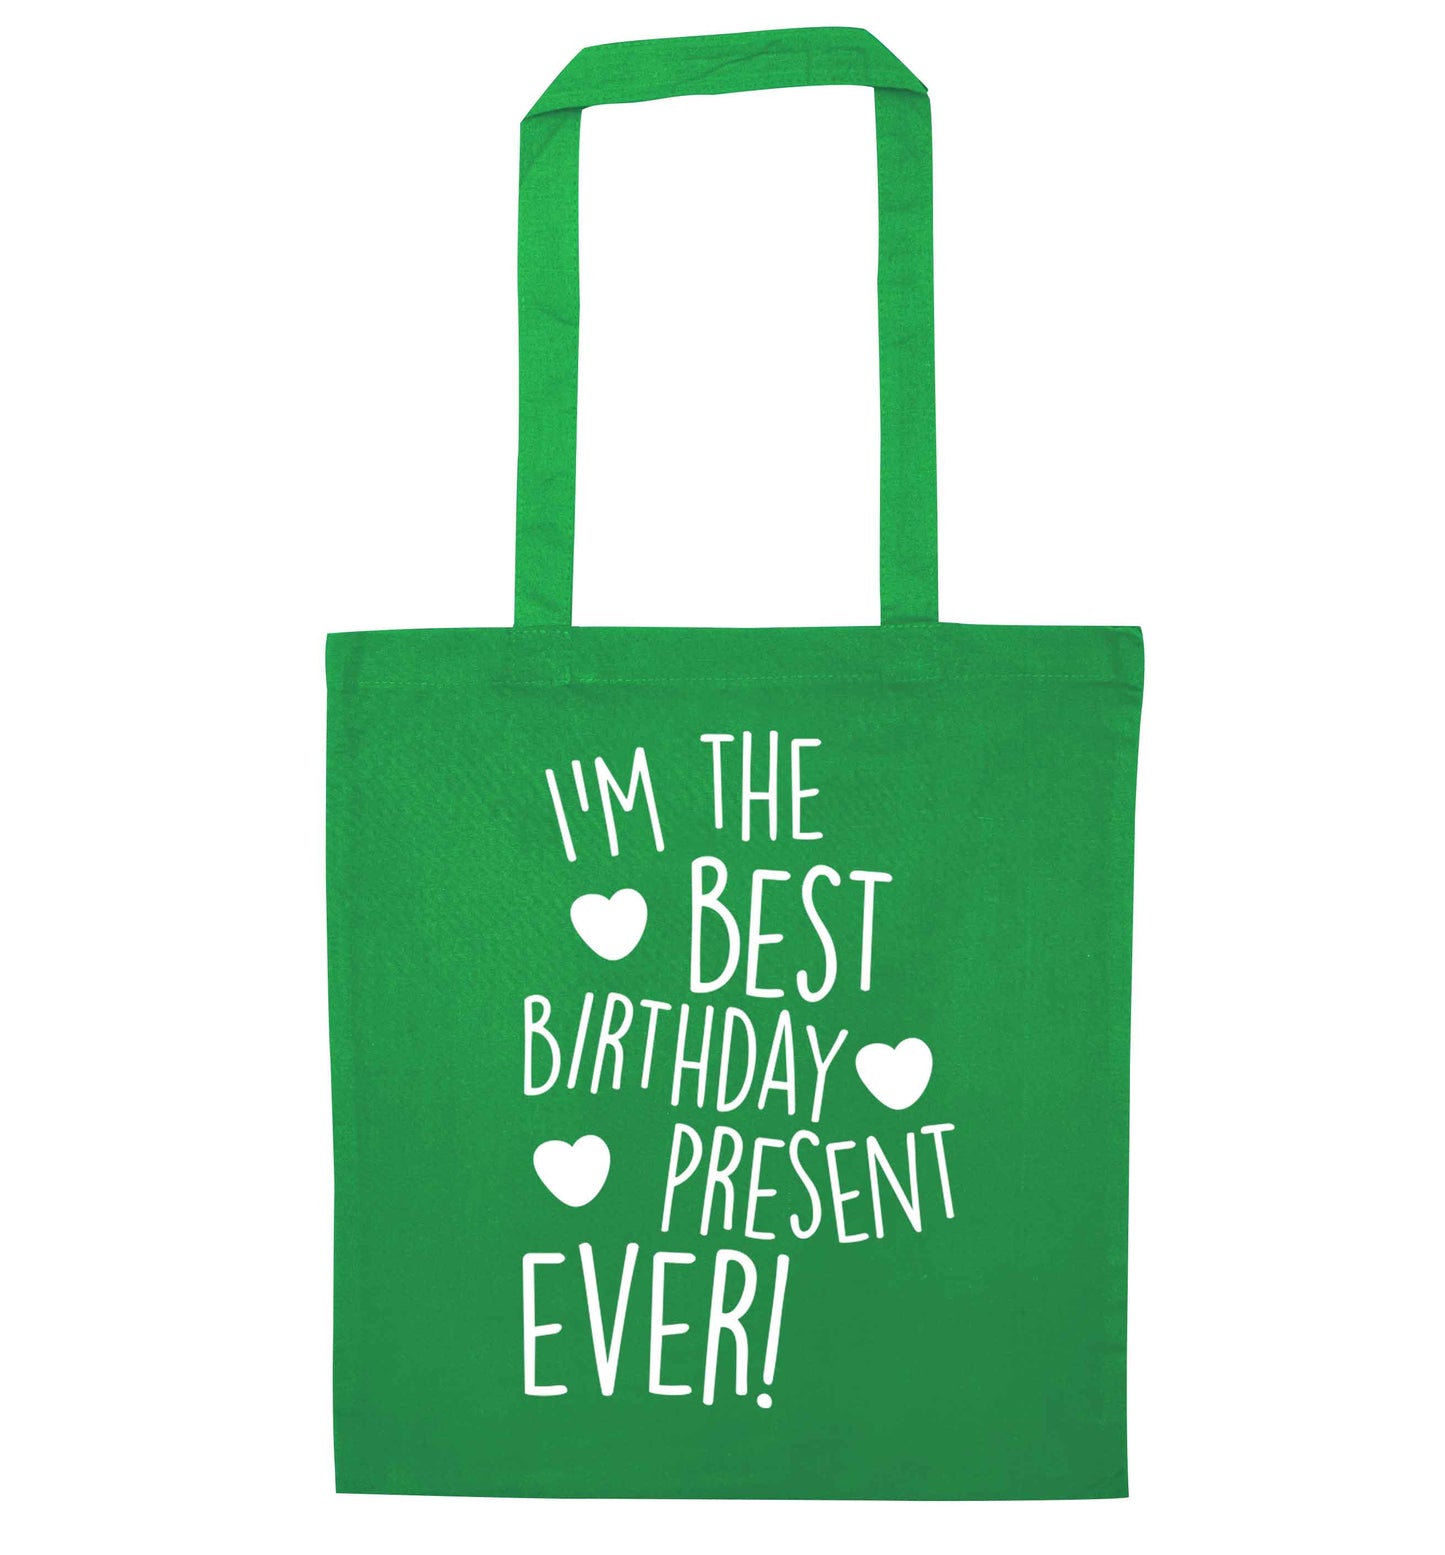 I'm the best birthday present ever green tote bag